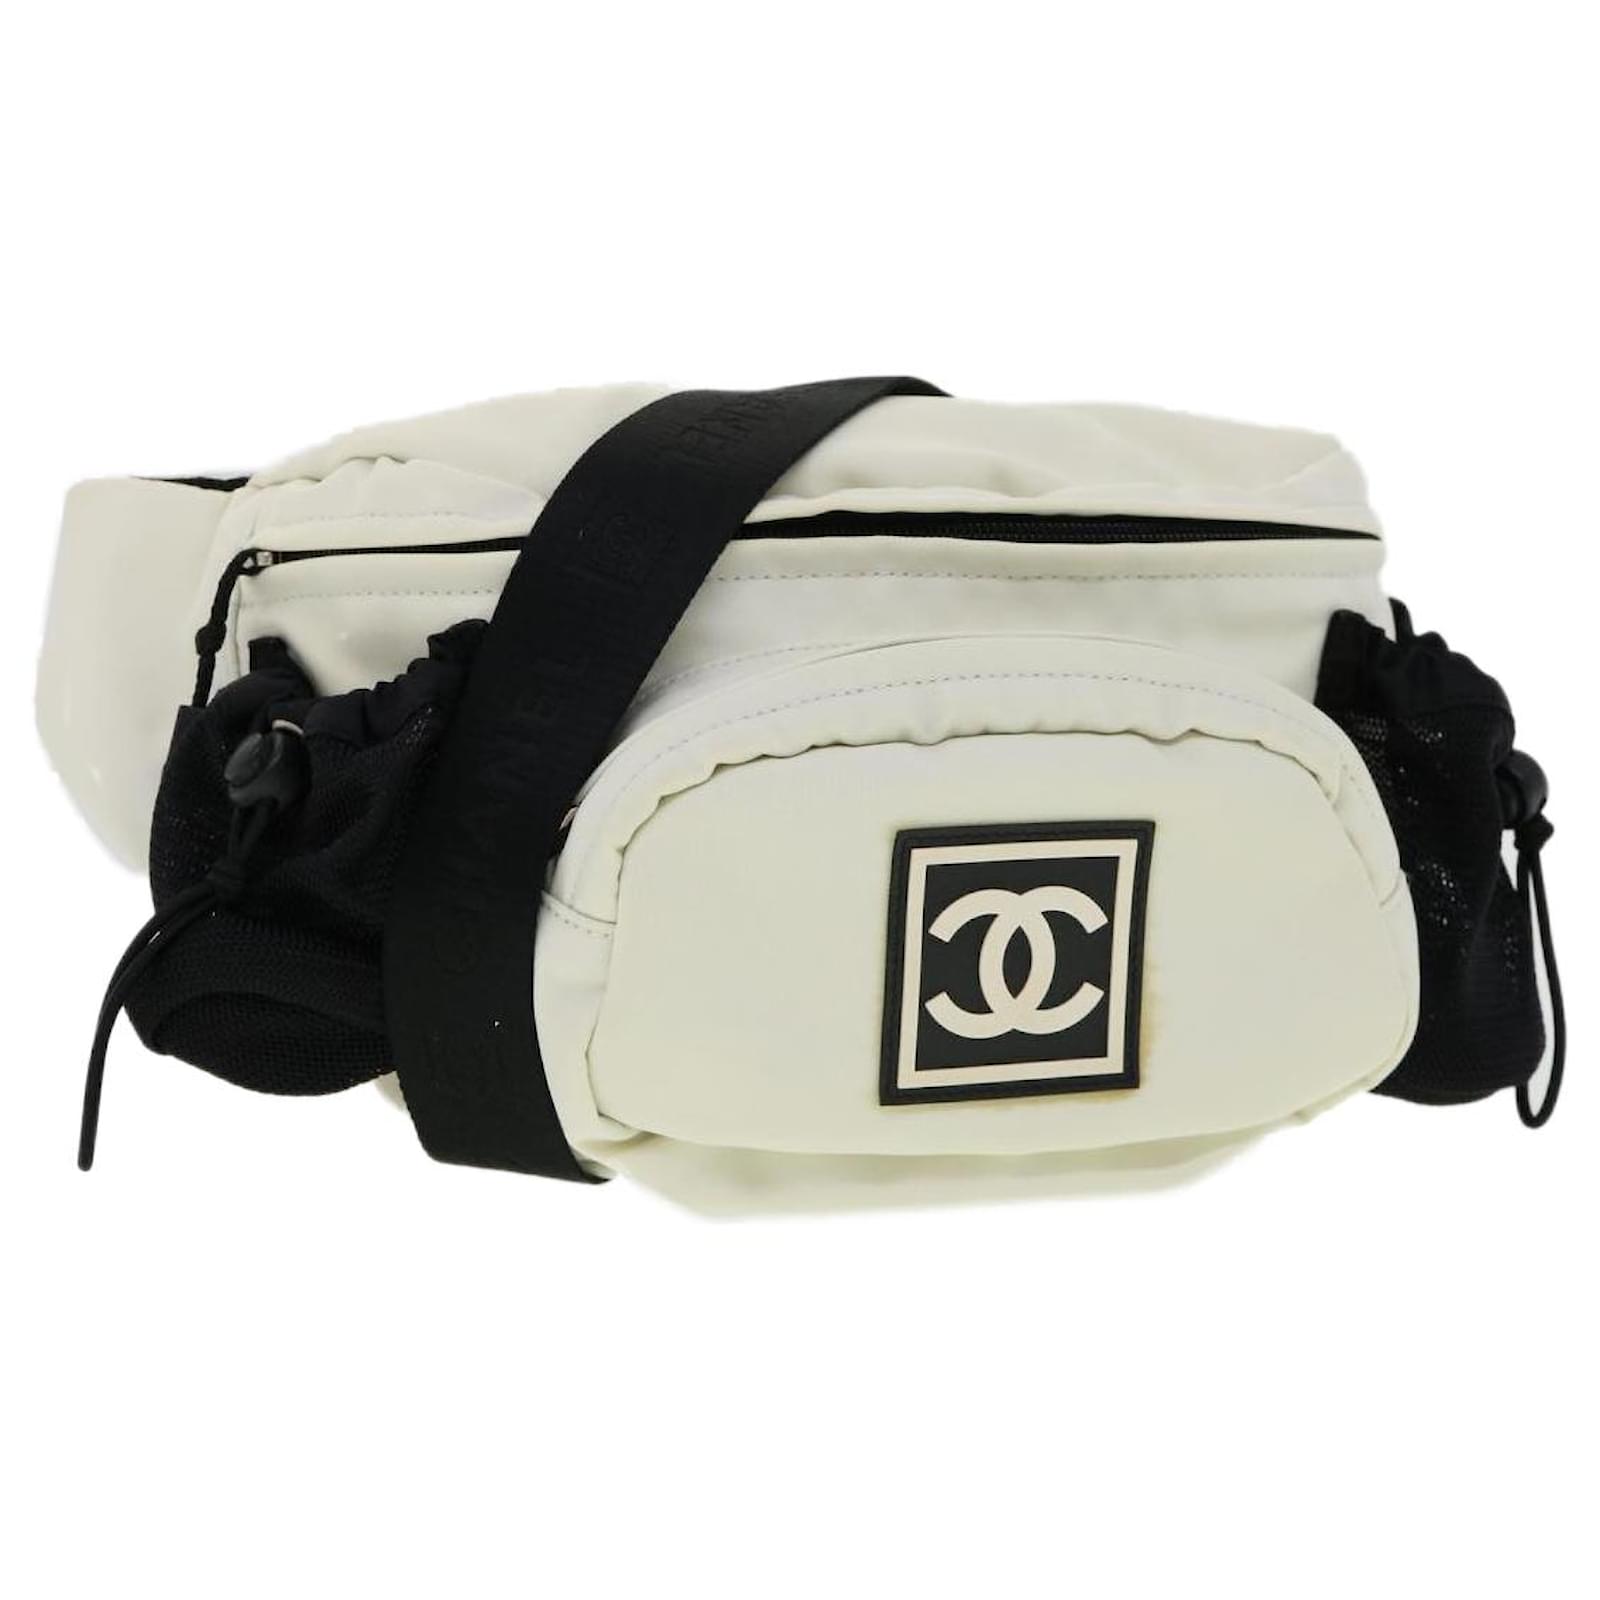 Chanel sport line nylon shoulder bag. This item is only available